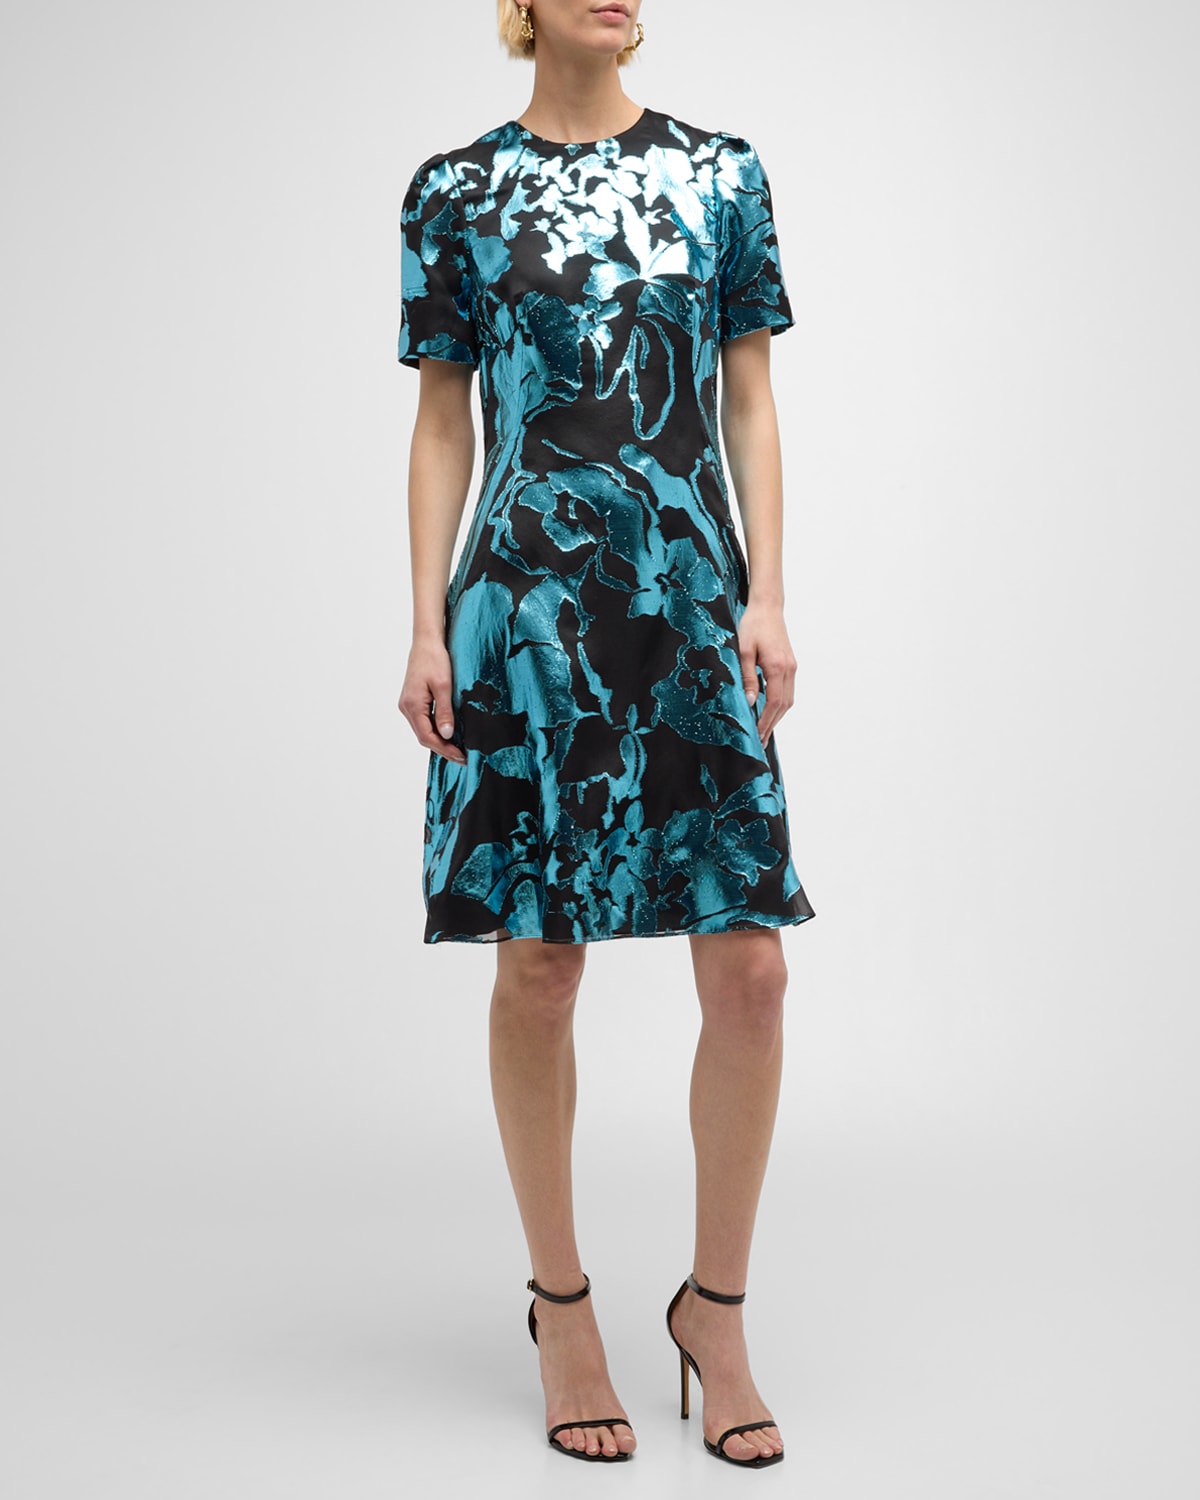 Metallic Floral Fil Coupe Short-Sleeve Cocktail Dress